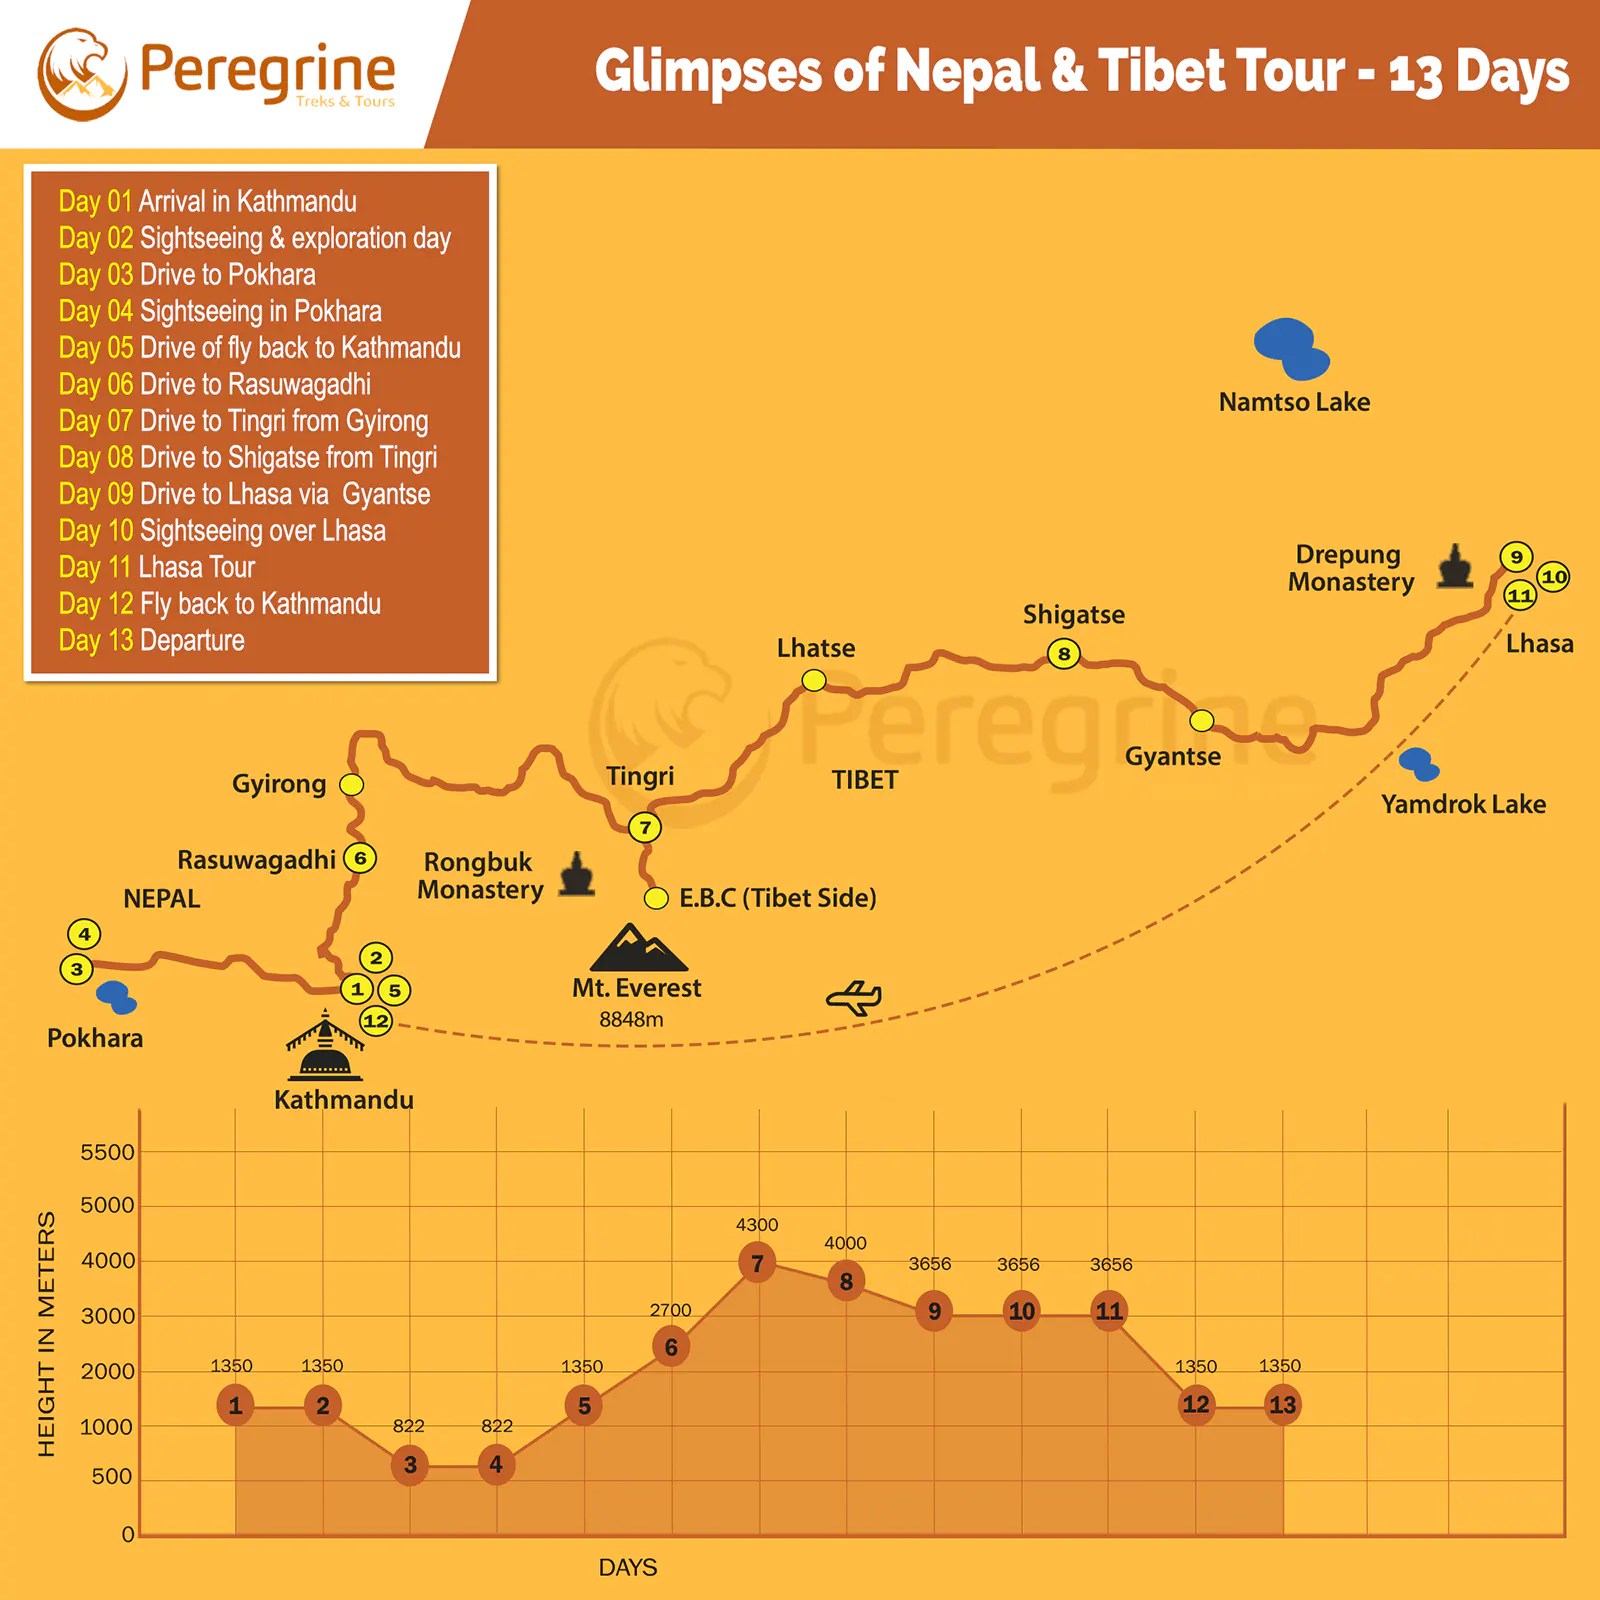 Glimpses of Nepal and Tibet Tour Map